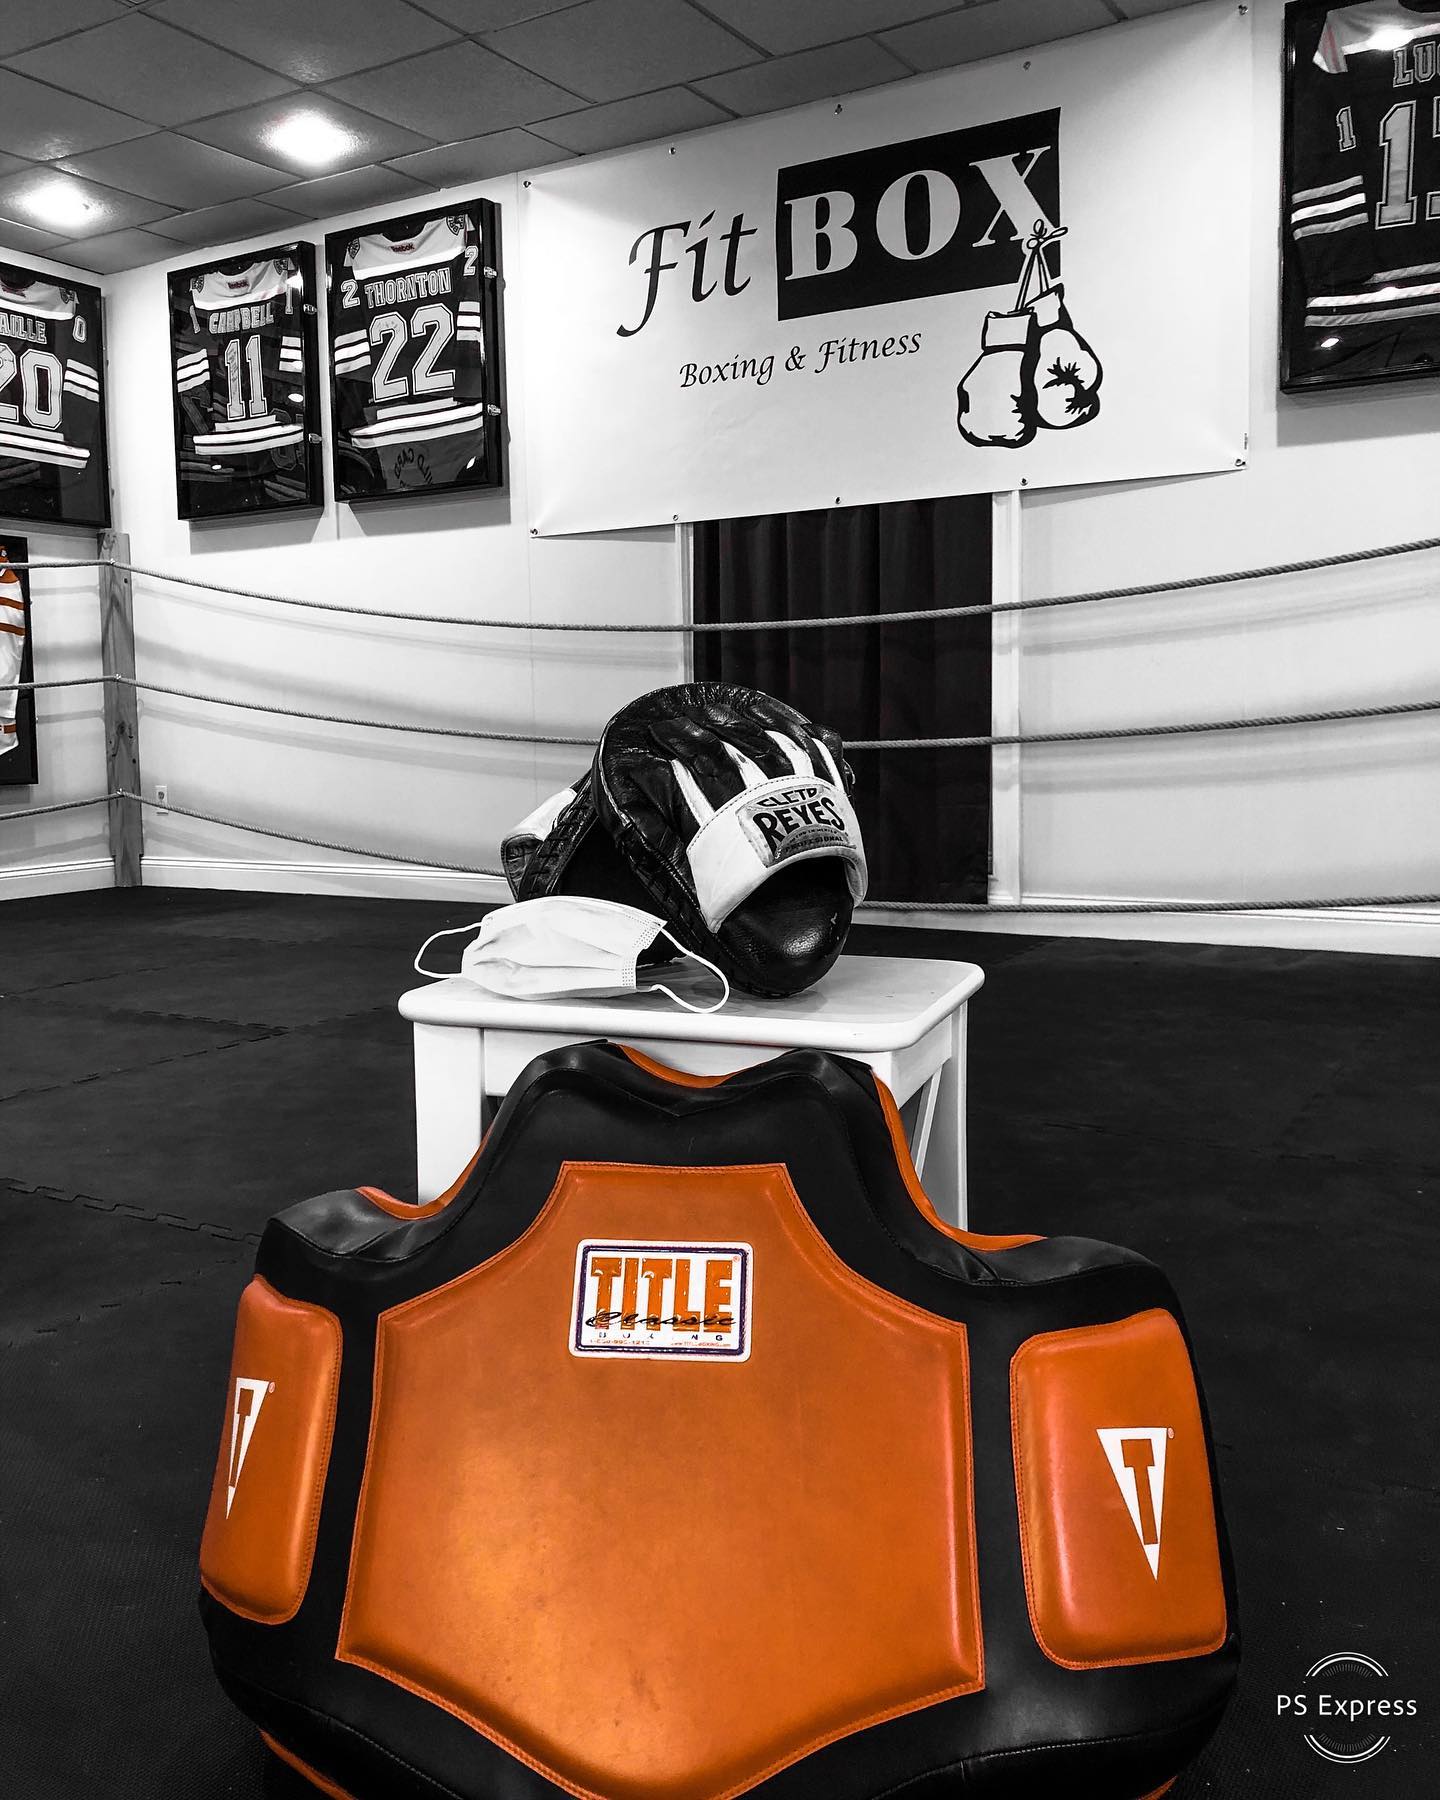 We offer all 1-on-1 boxing fitness workouts in our clean, safe boxing studio located in Dedham,Ma . If you are interested in trying a free boxing workout in a non-group setting contact us for more information at call/text (781)727-9503 or email FitBOX@outlook.com .